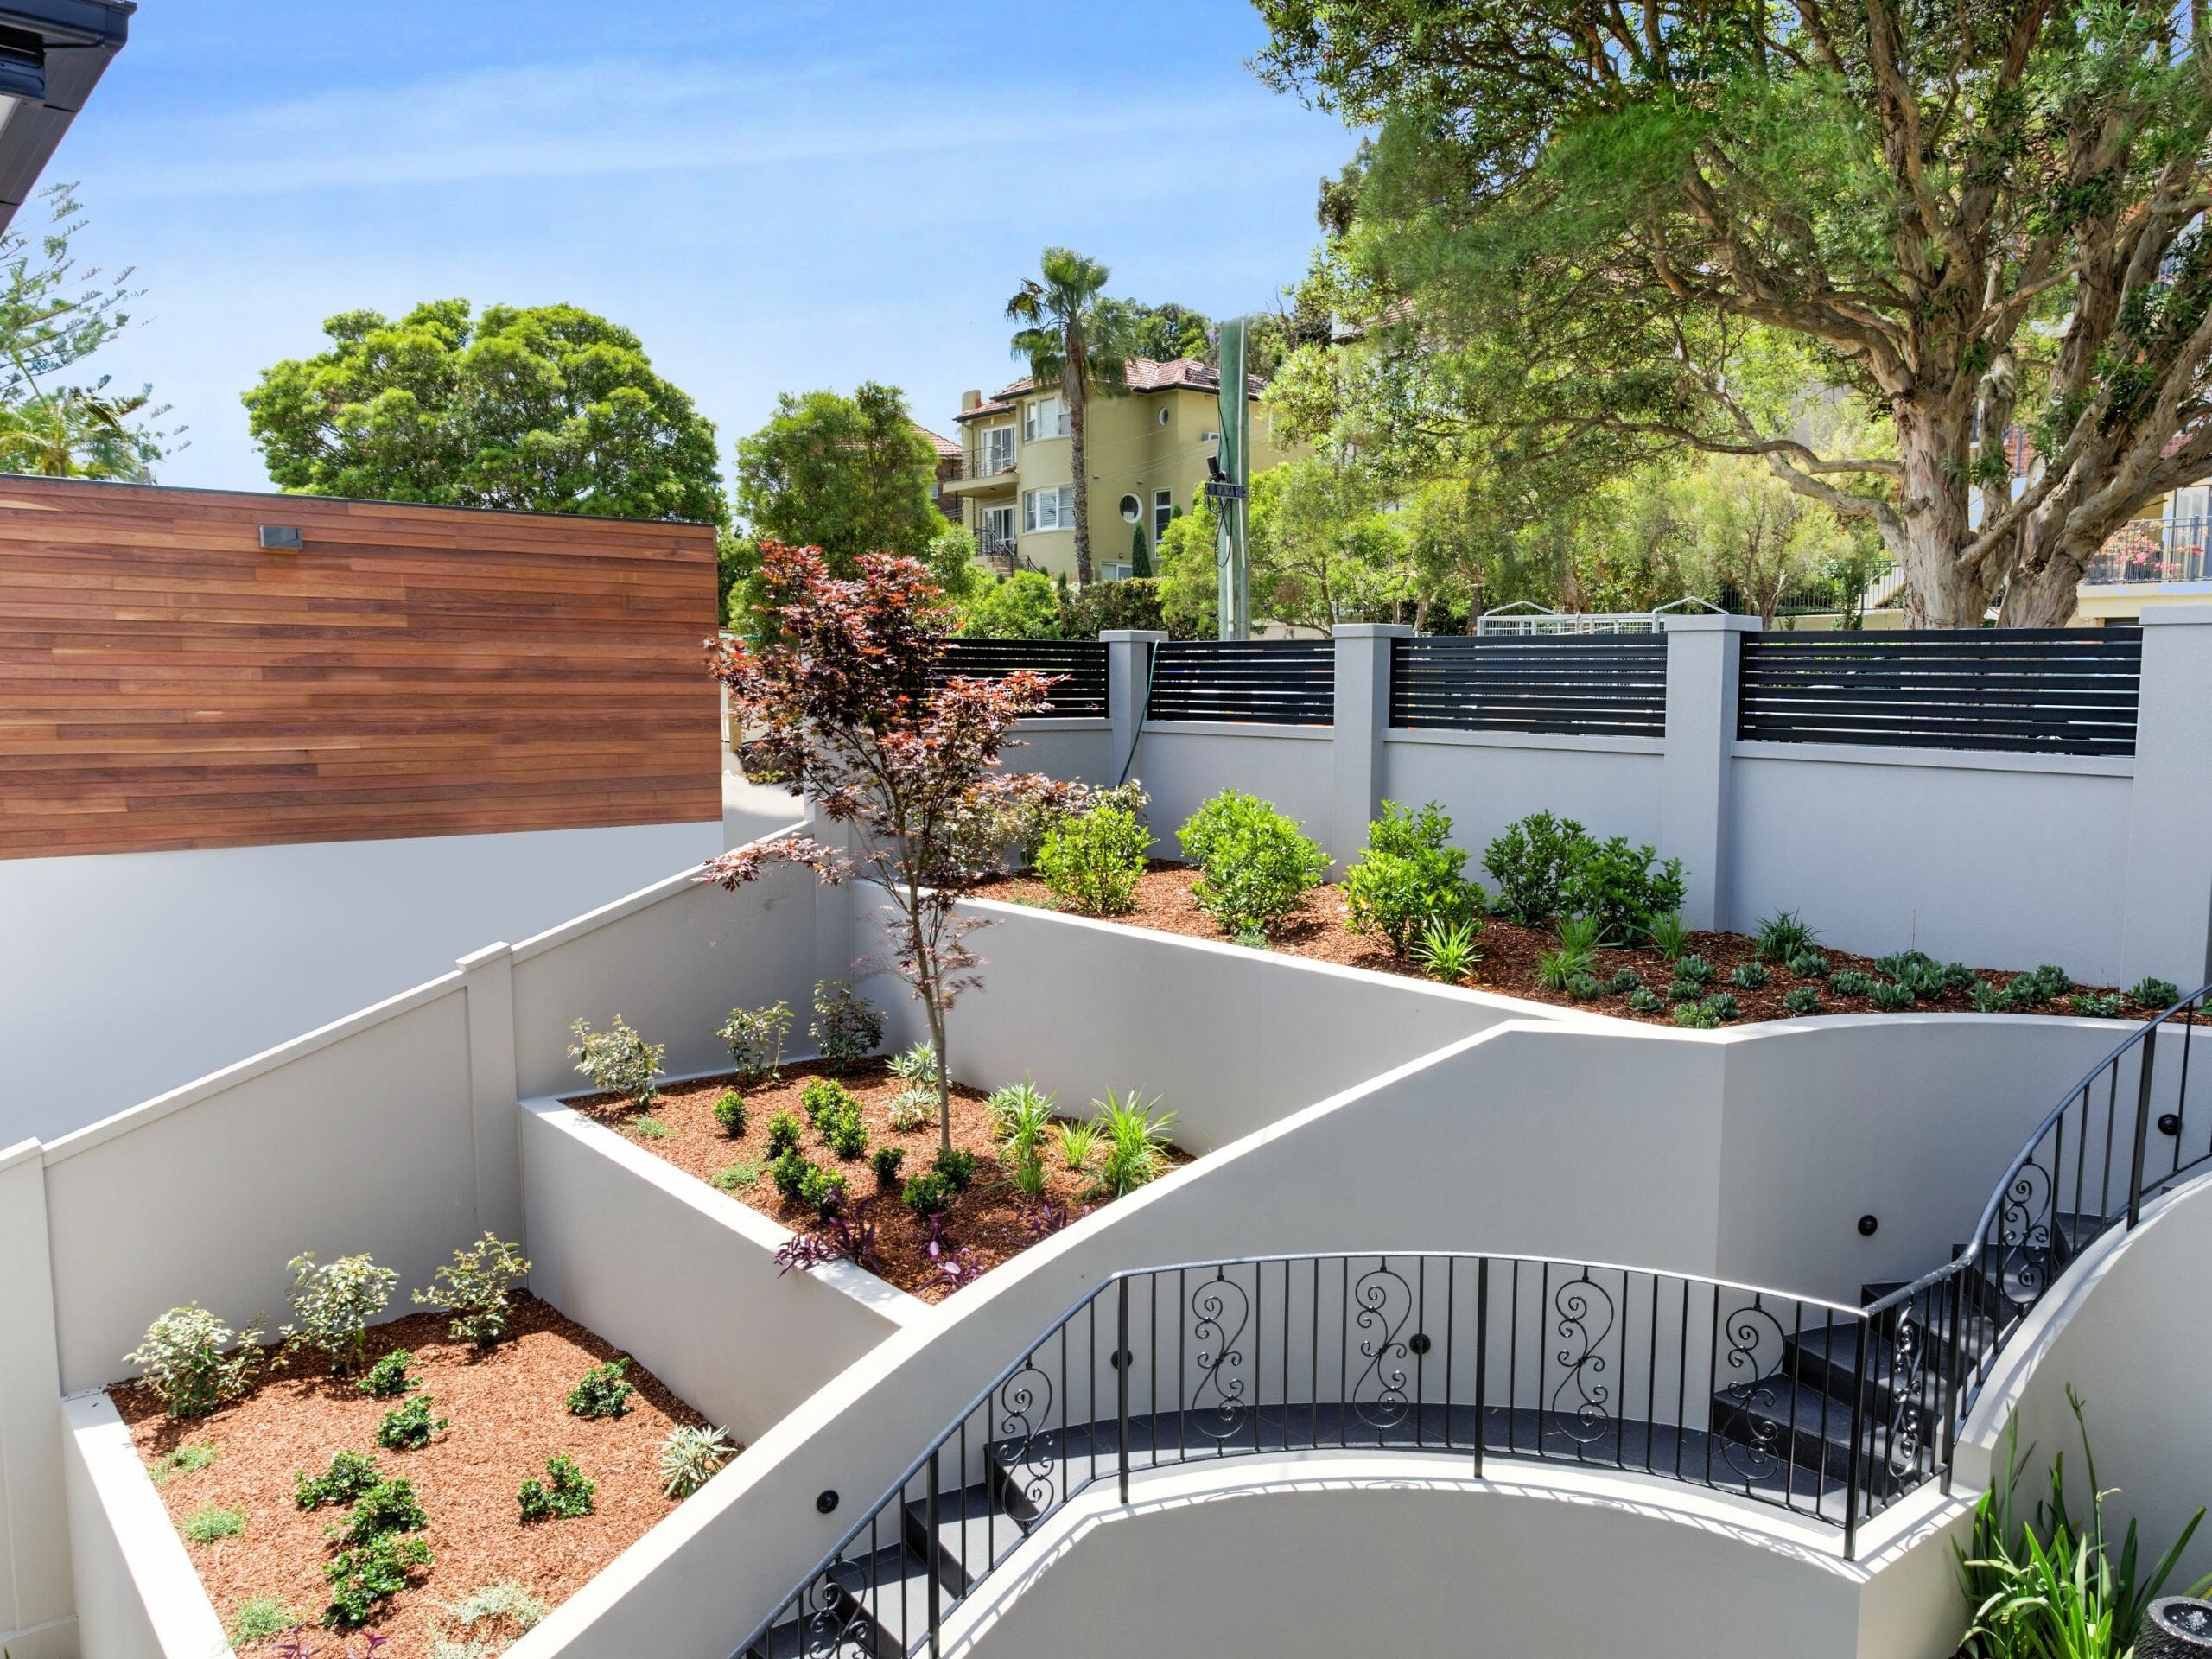 Creating a tiered backyard is an excellent way to maximise enjoyment of an uneven block